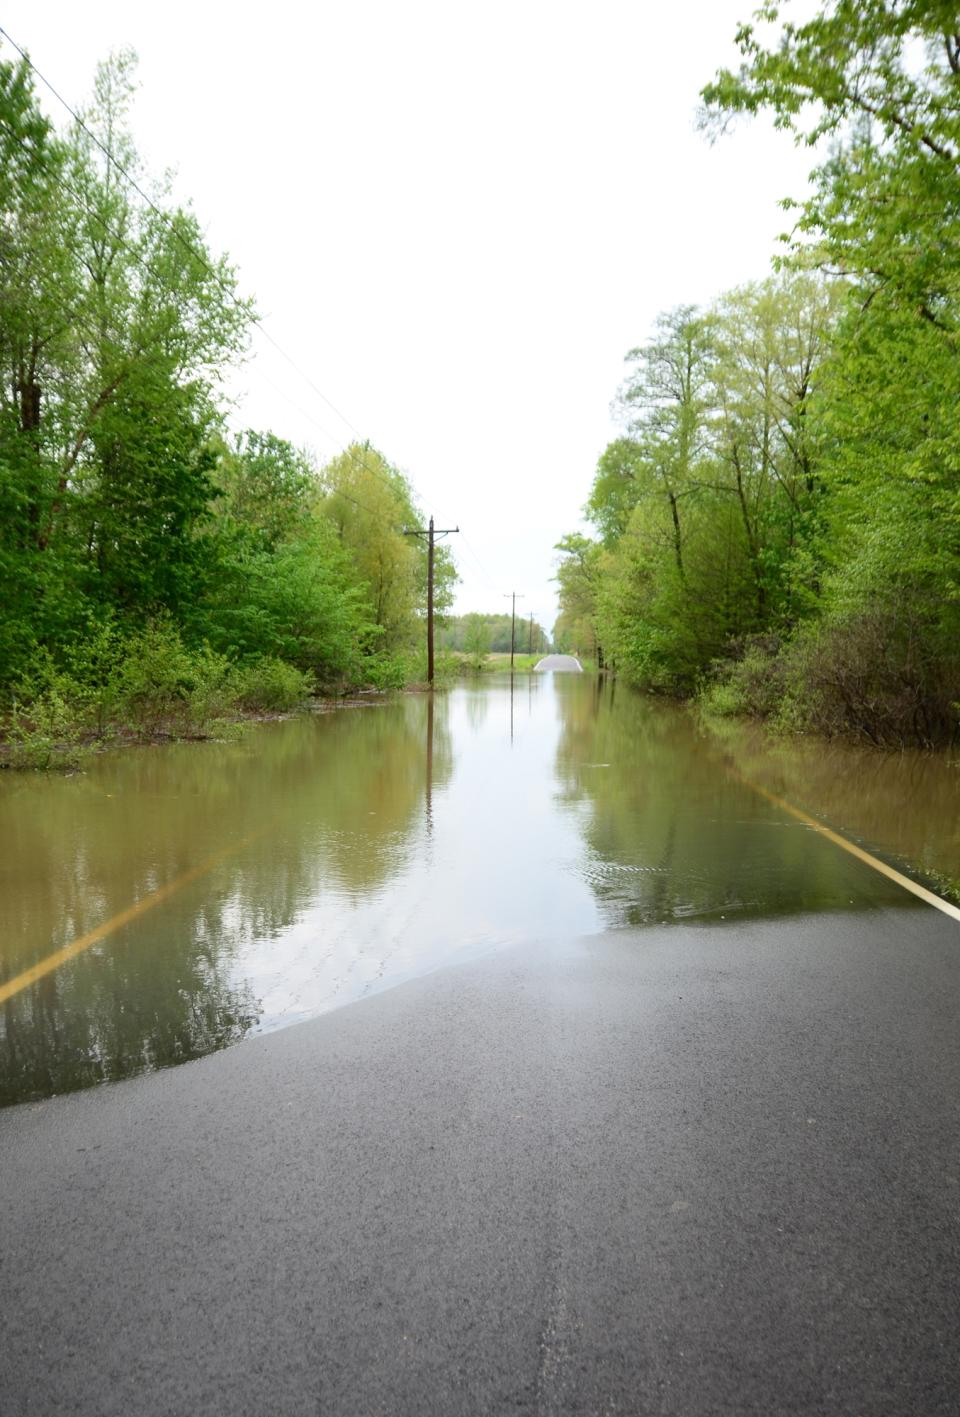 Waters stands across Bonds Road in McCracken County, which is closed at the intersection of Oaks Road due to flooding, Monday, April 28, 2014, in Paducah, Ky. (AP Photo/The Paducah Sun)